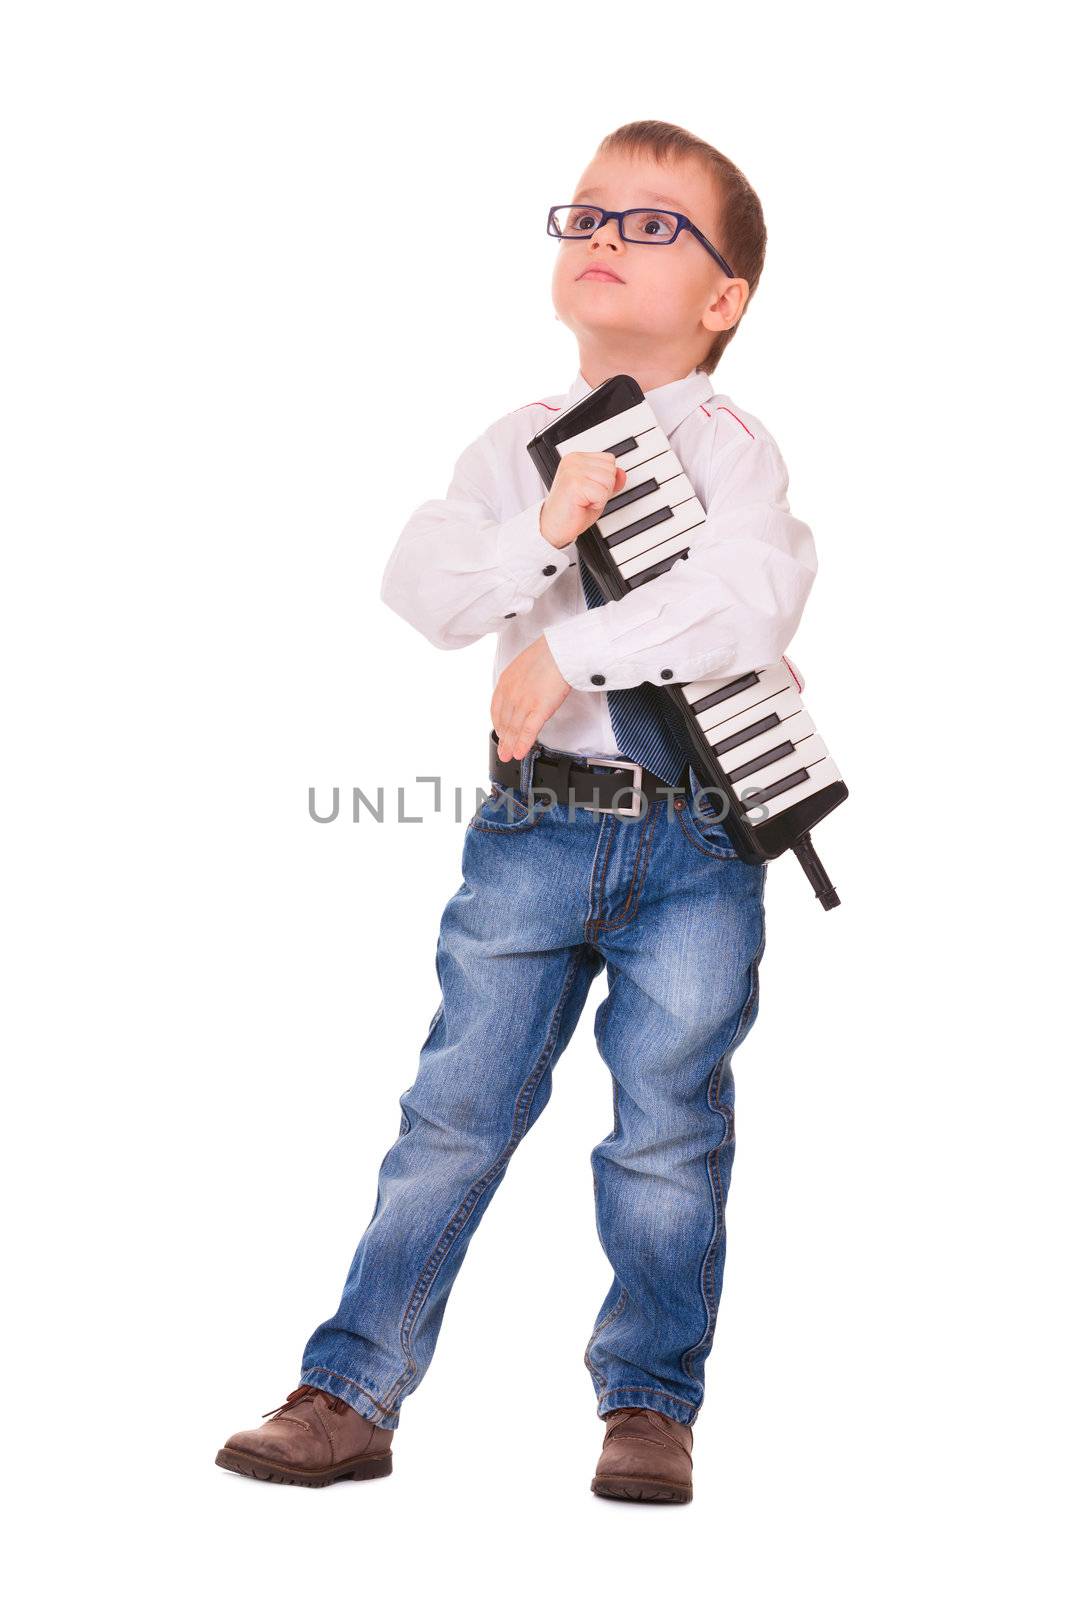 Preschool boy in glasses, jeans and white shirt with melodica, isolated on white background